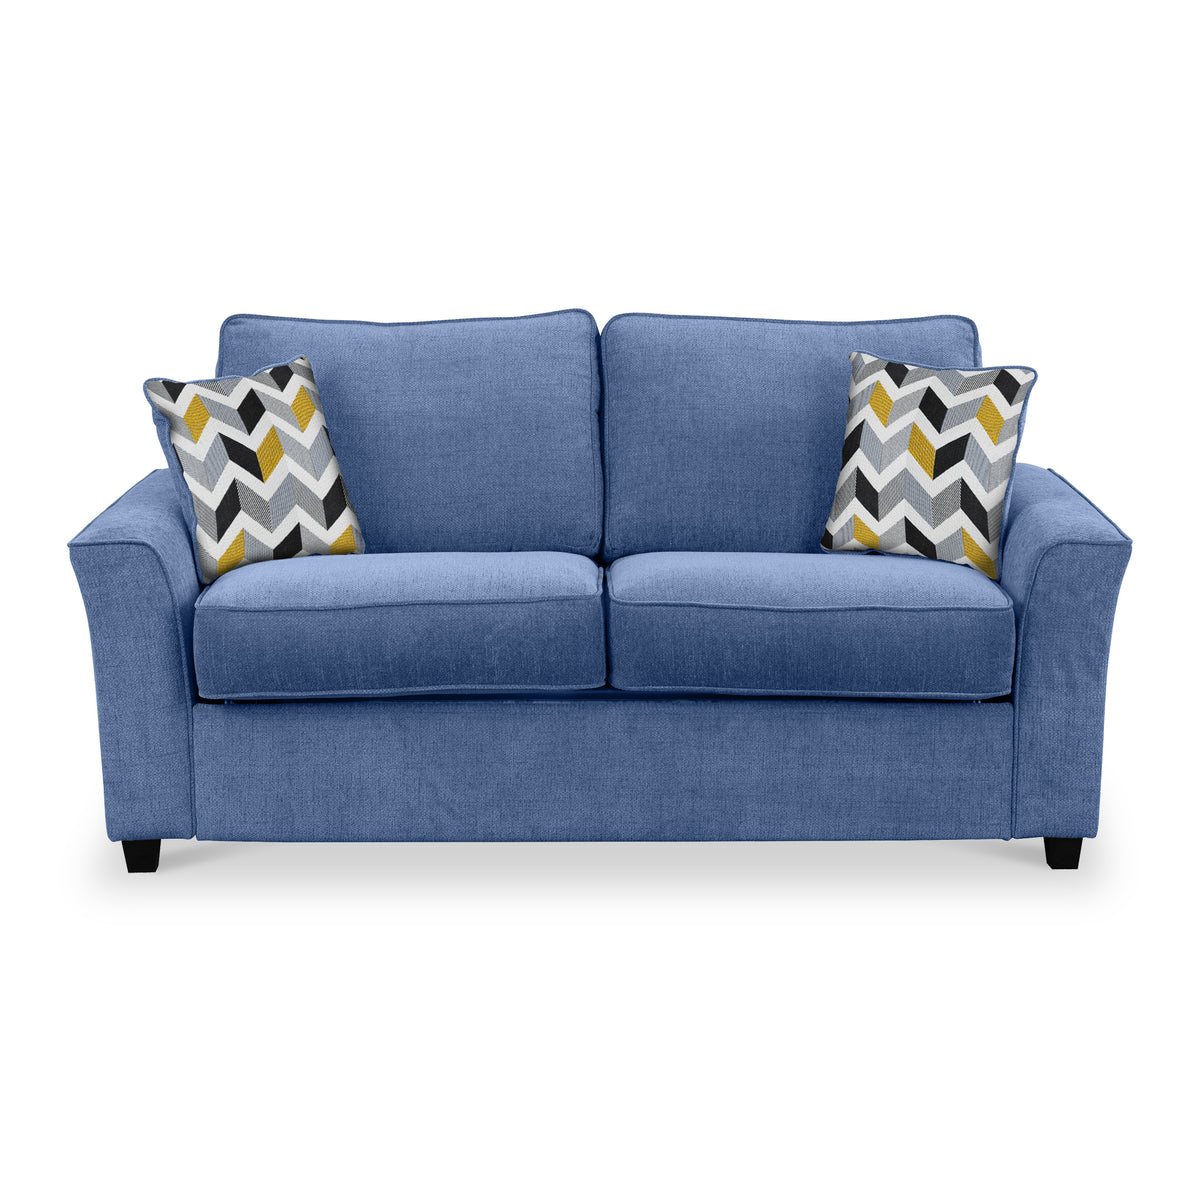 Abbott 2 Seater Sofabed in Denim with Morelisa Mustard Cushions by Roseland Furniture